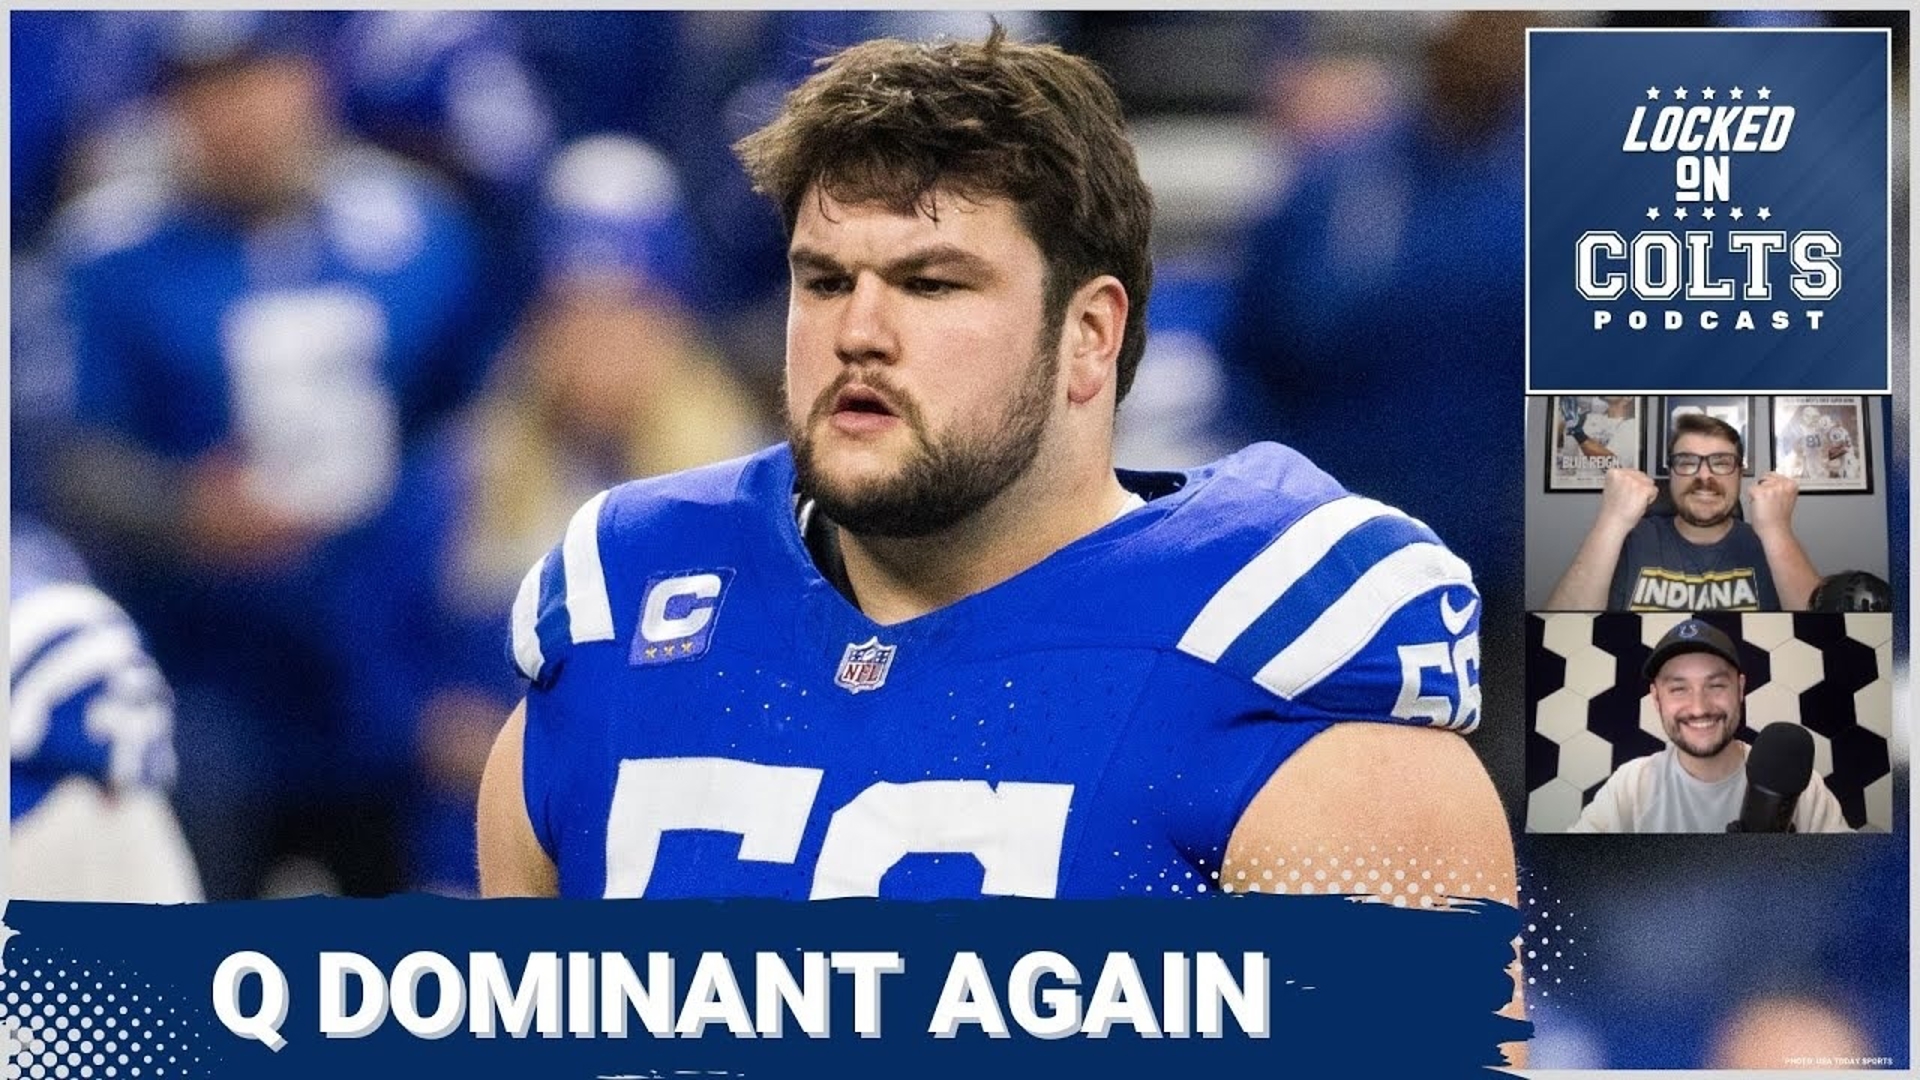 Indianapolis Colts (and future Hall of Famer) guard Quenton Nelson returned to his dominant form in 2023 after a down year in 2022.